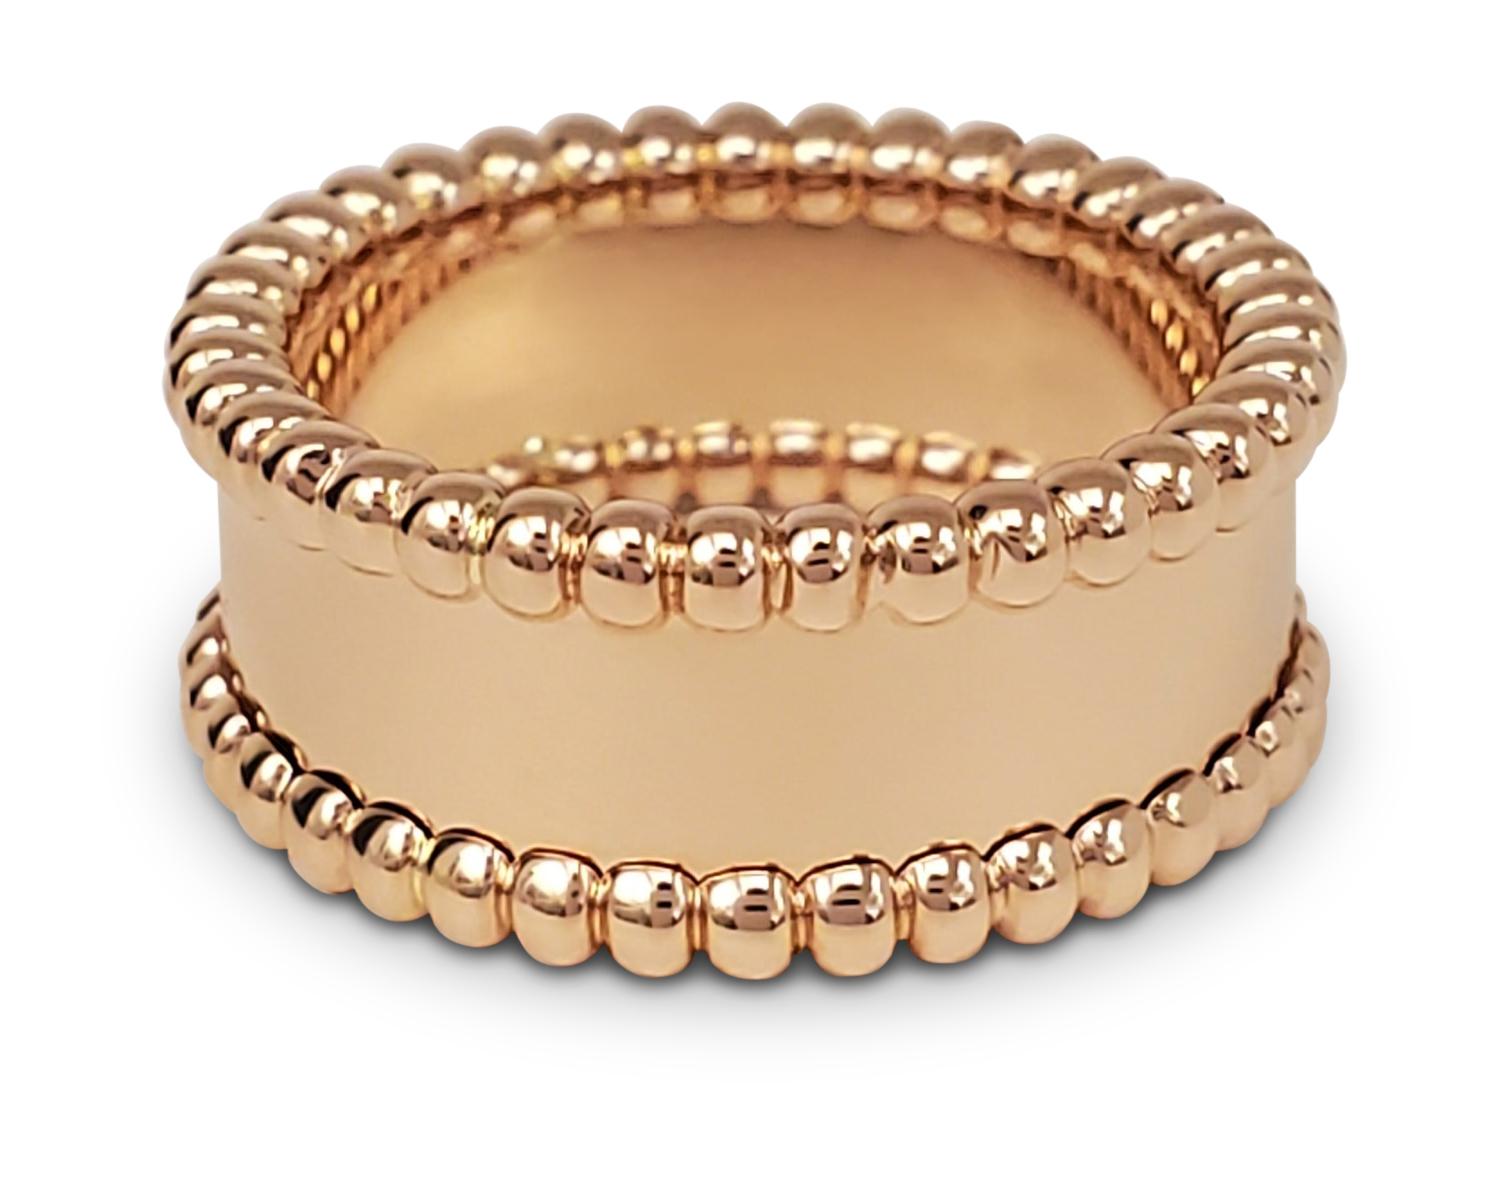 Authentic Van Cleef & Arpels Perlée ring crafted in 18 karat rose gold.  Ring is engraved Van Cleef & Arpels on the outside of the band.  Signed VCA, G750, 48 with serial number. Size 48, US size 4.5.  Ring is presented with original box and